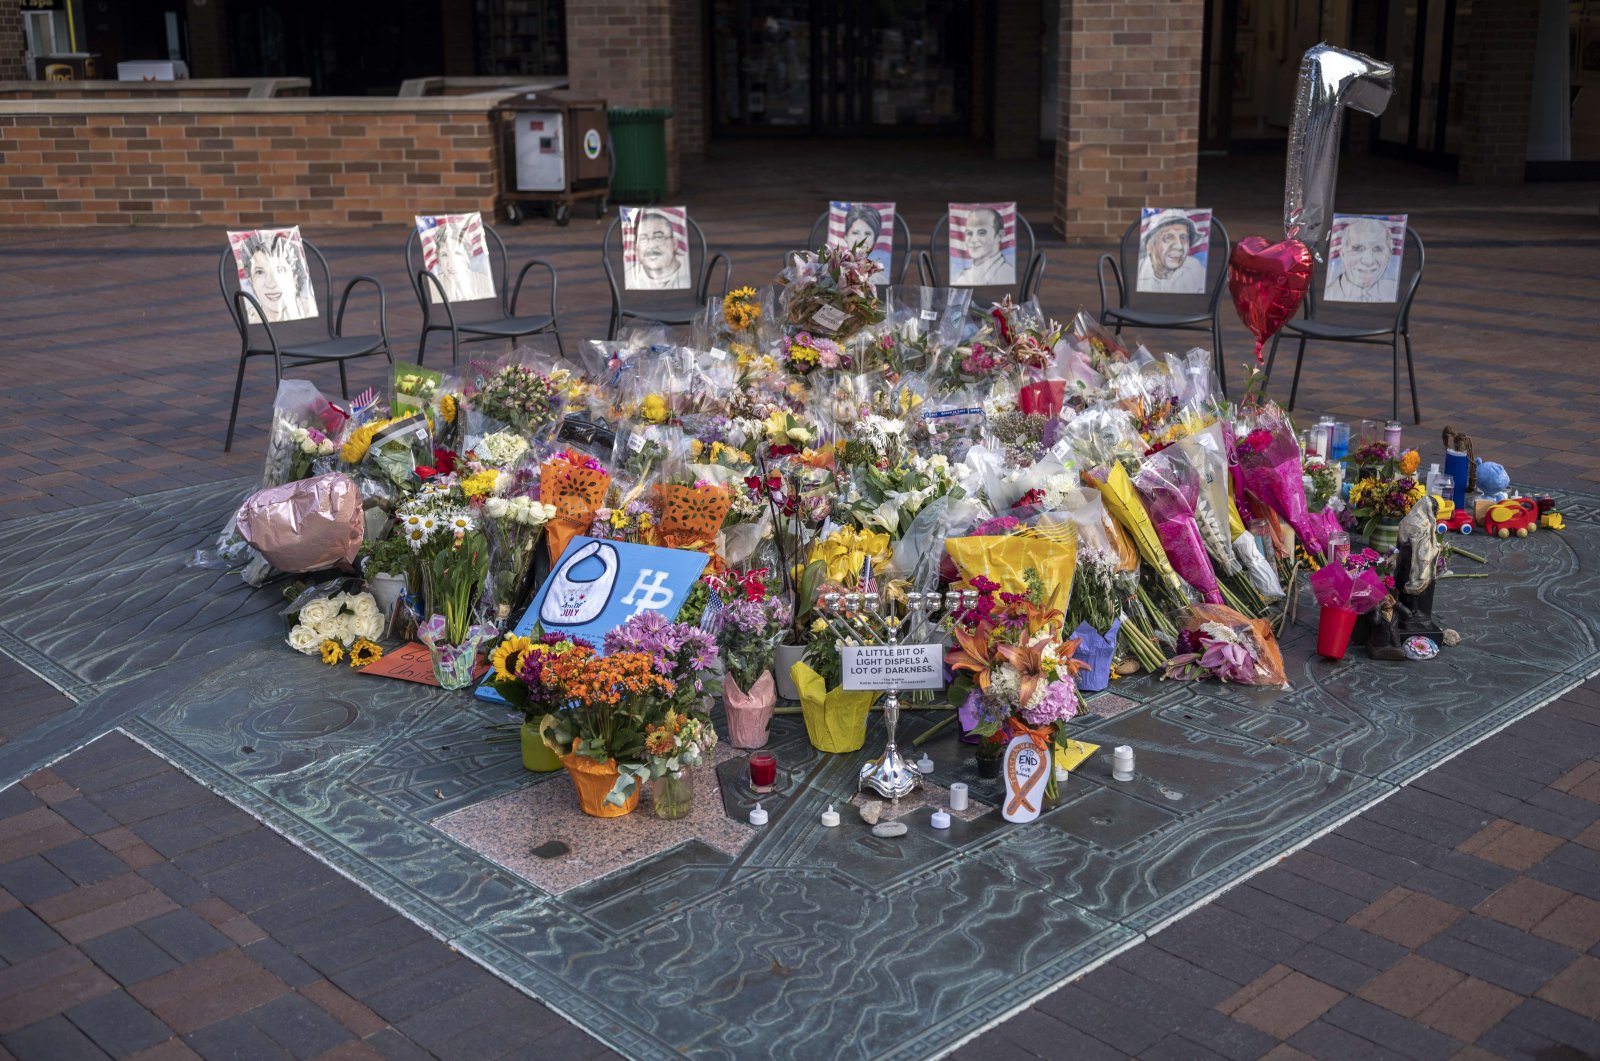 A make-shift memorial in the city center near where police say accused shooter Robert “Bobby” E. Crimo III opened fire on a crowd during a Fourth of July parade, in Highland Park, Illinois, U.S., July 10, 2022. (AFP Photo)